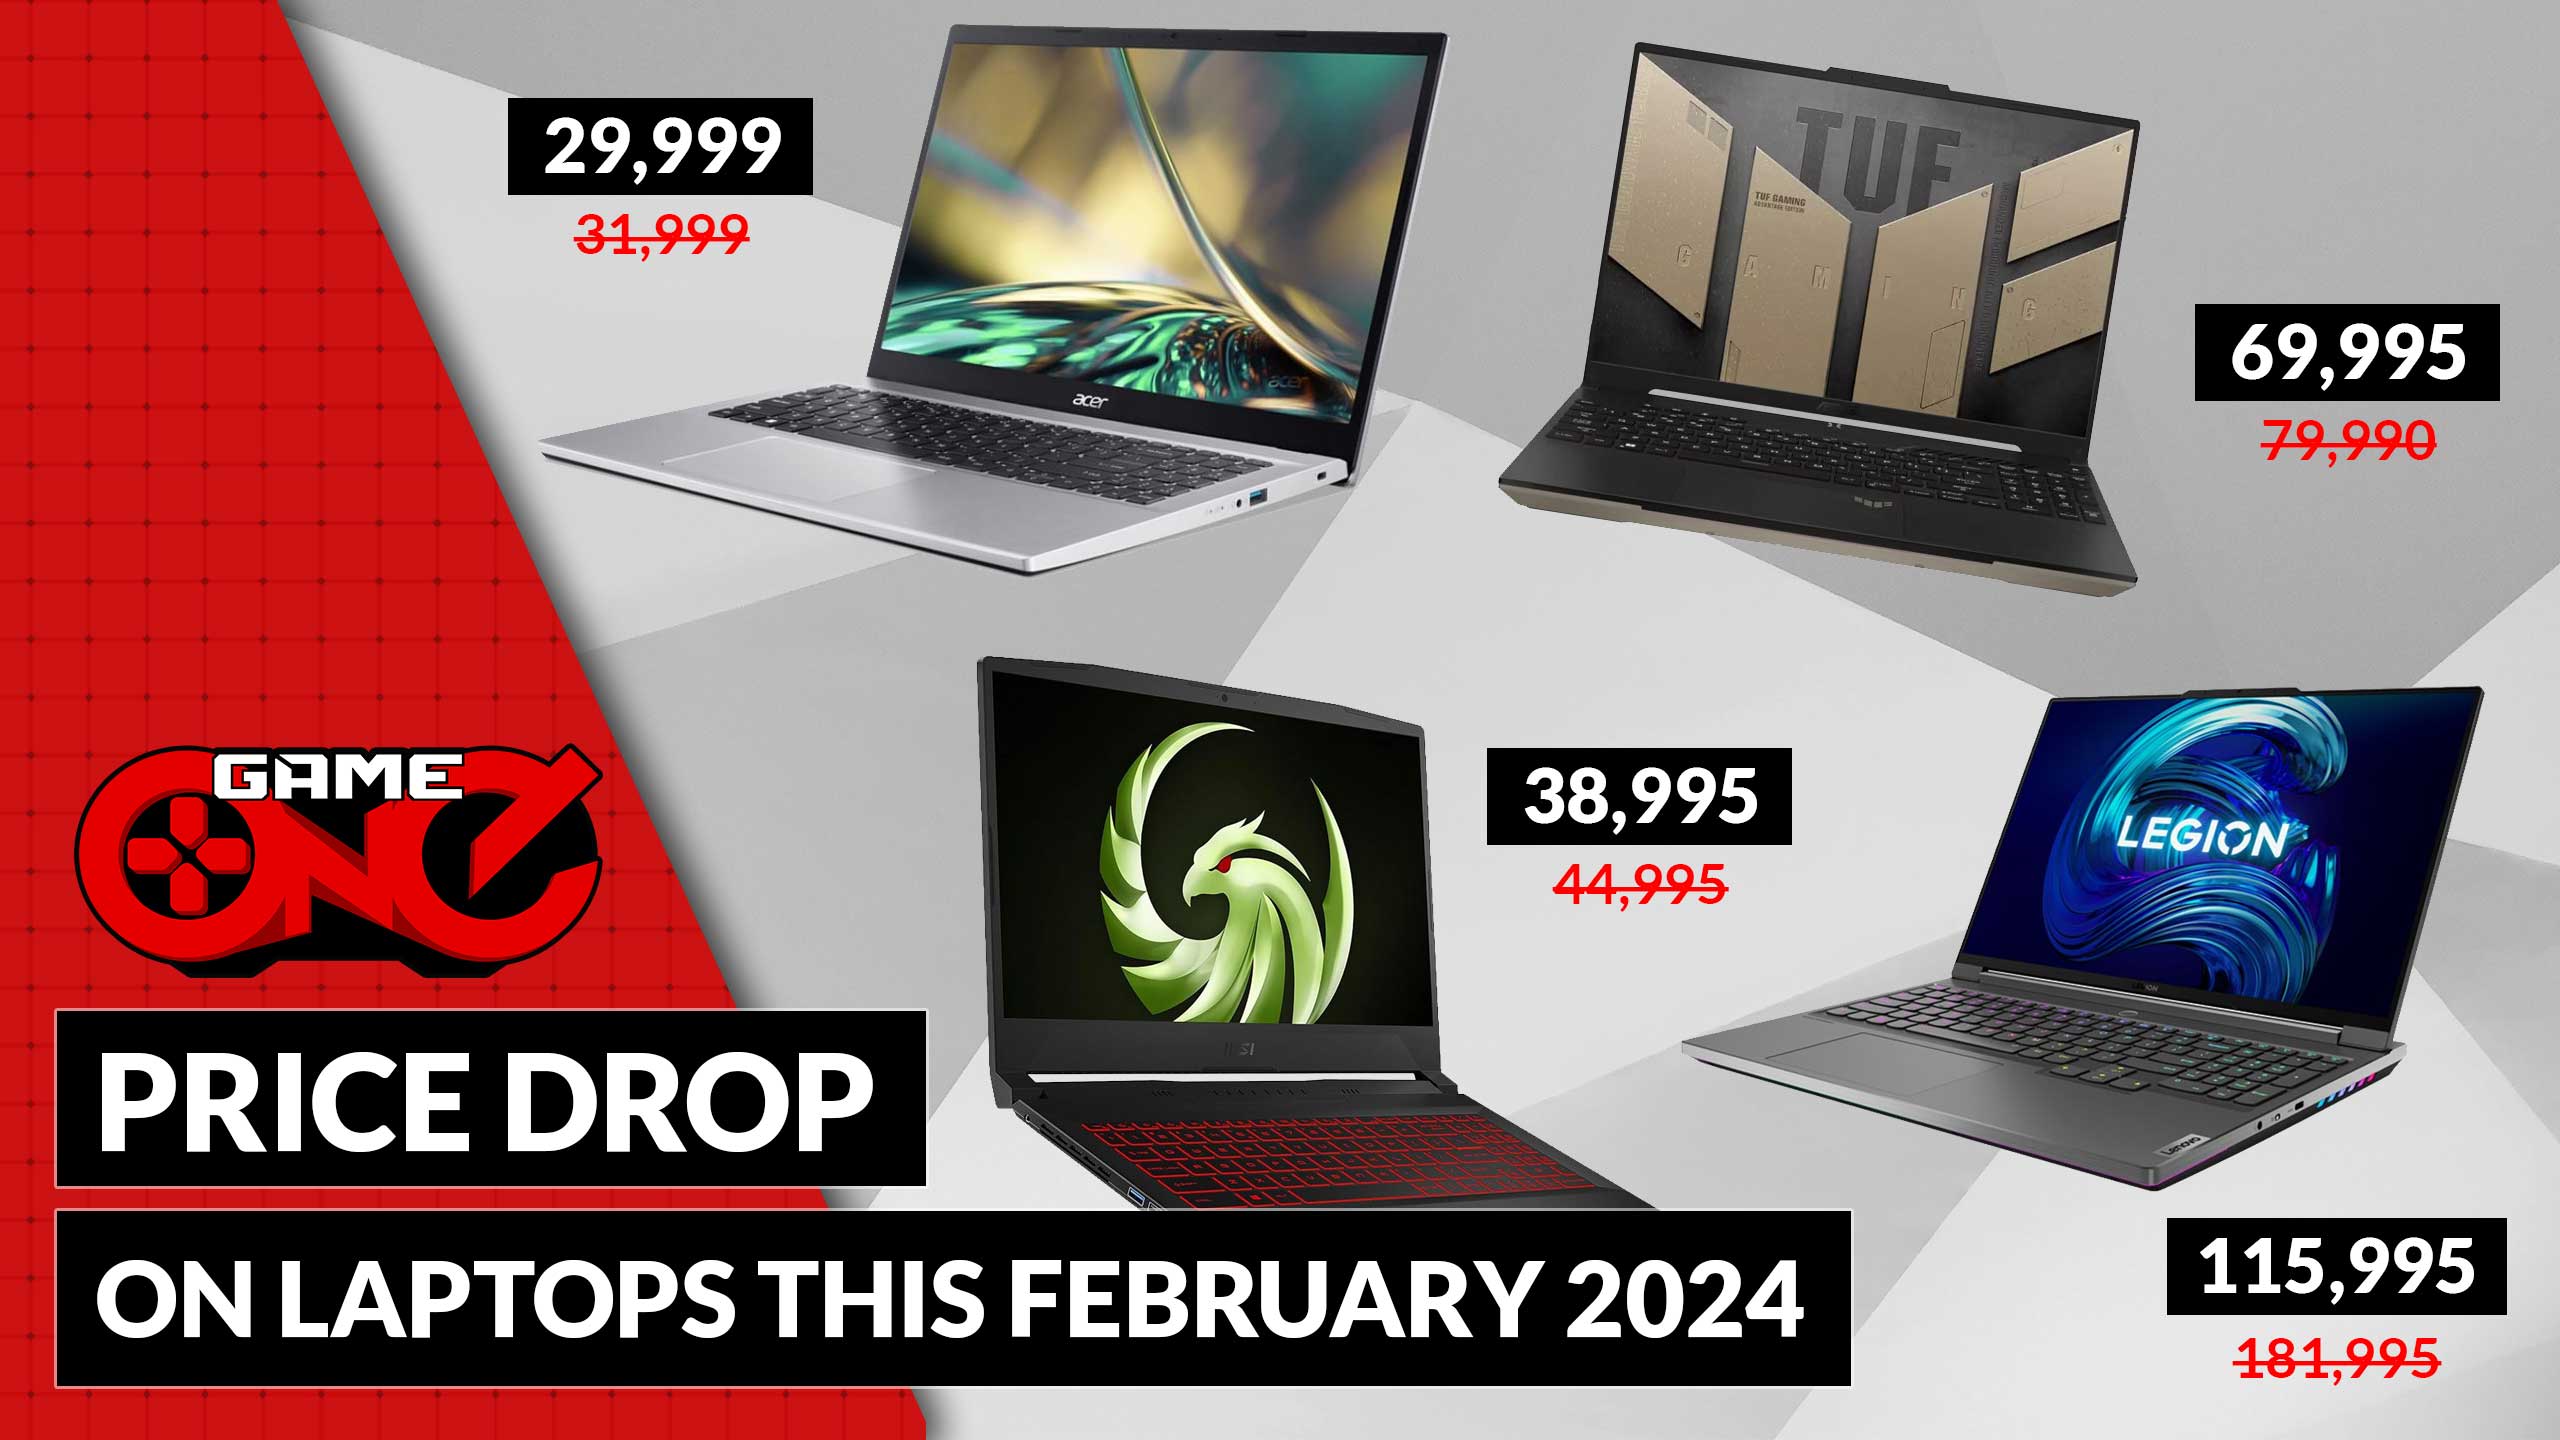 Game One PRICE DROP on Laptops this February 2024! Blog